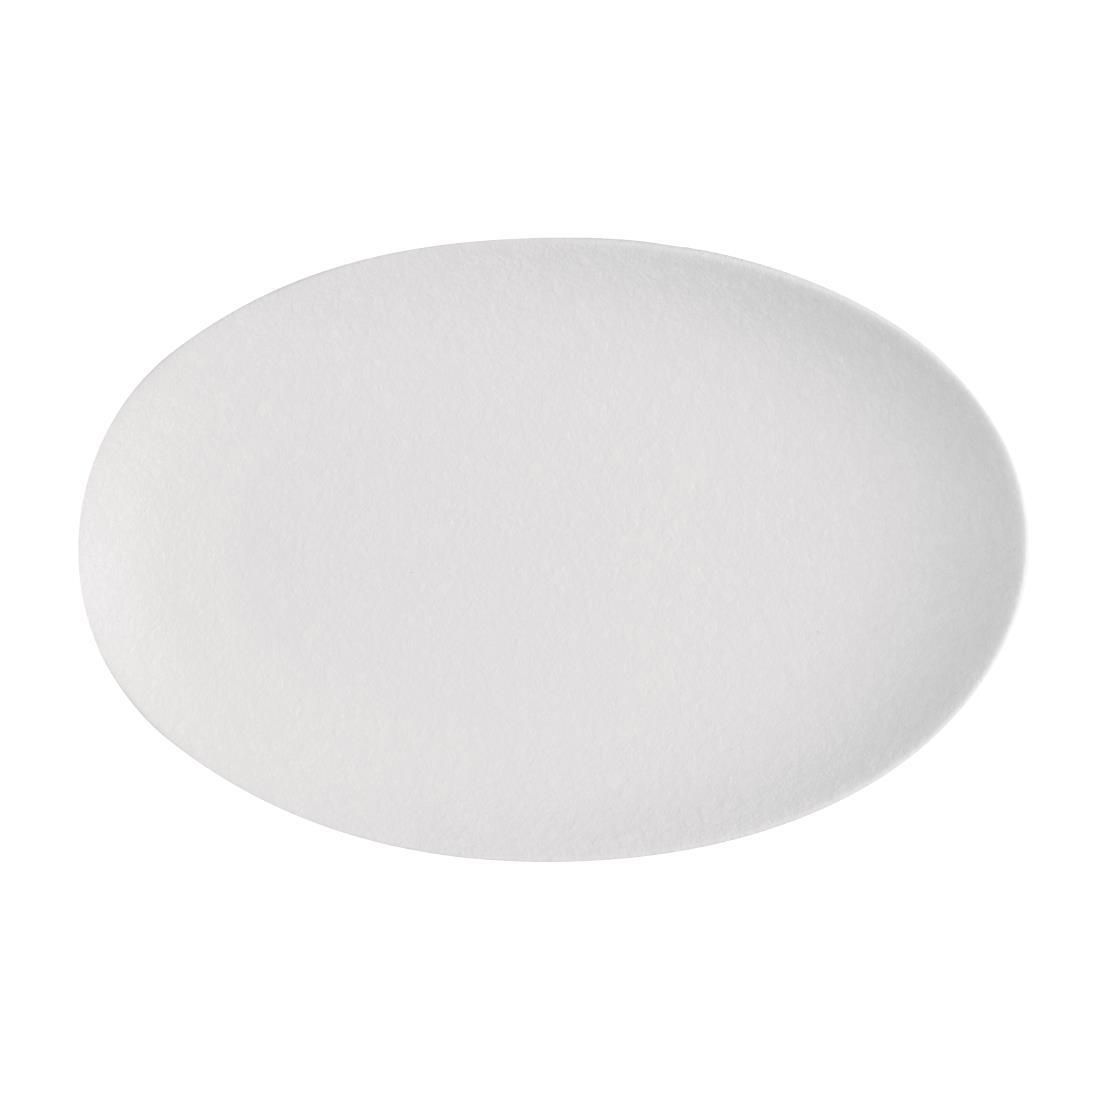 Olympia Salina Oval Plates 305mm (Pack of 4) - FD016  - 1